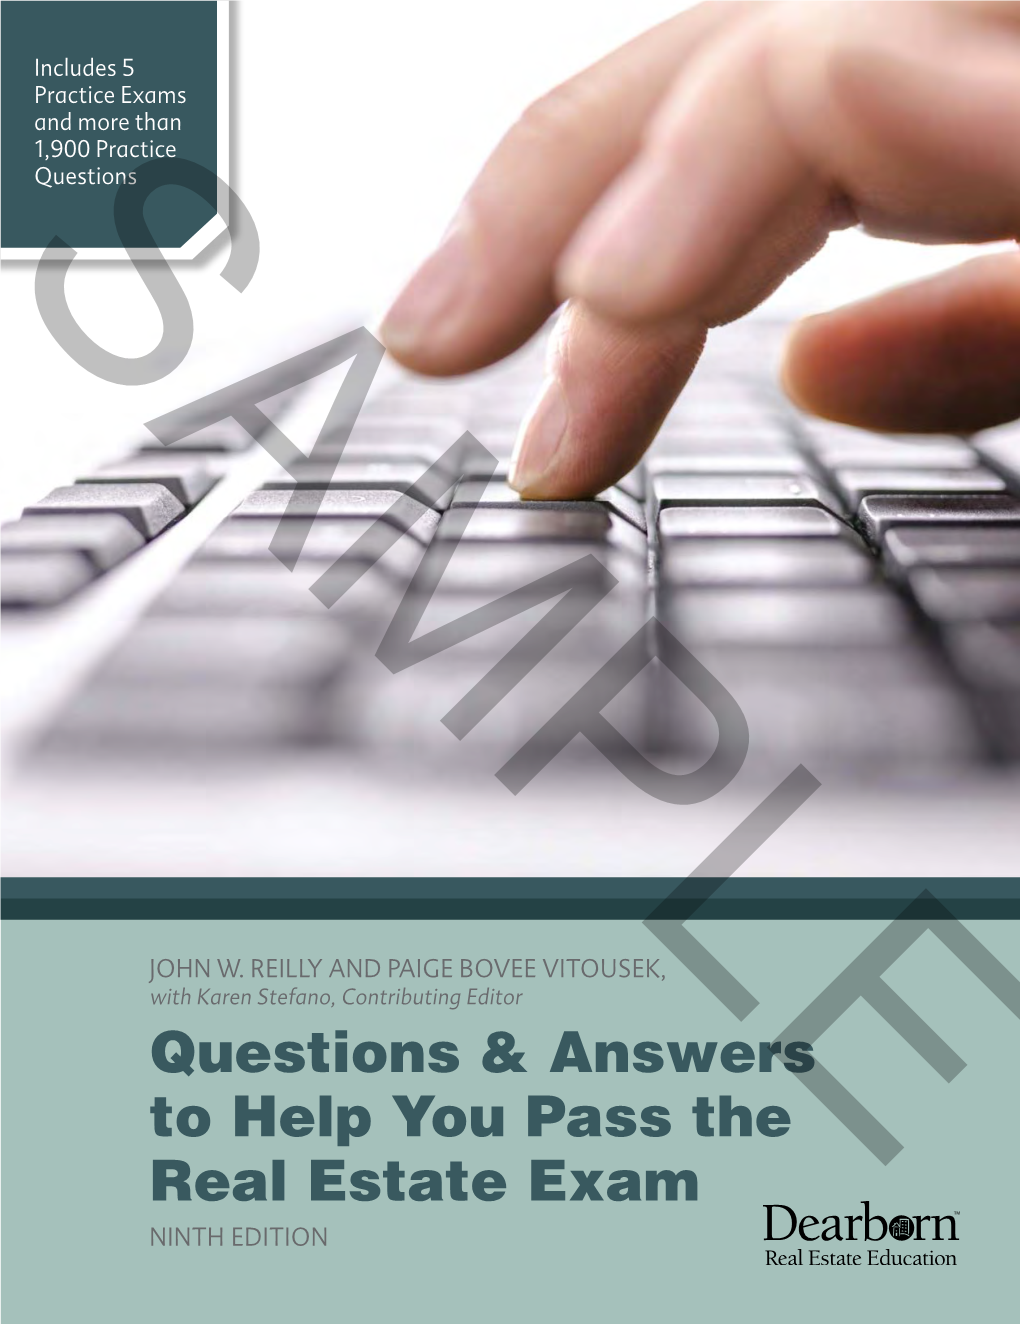 Questions & Answers to Help You Pass the Real Estate Exam